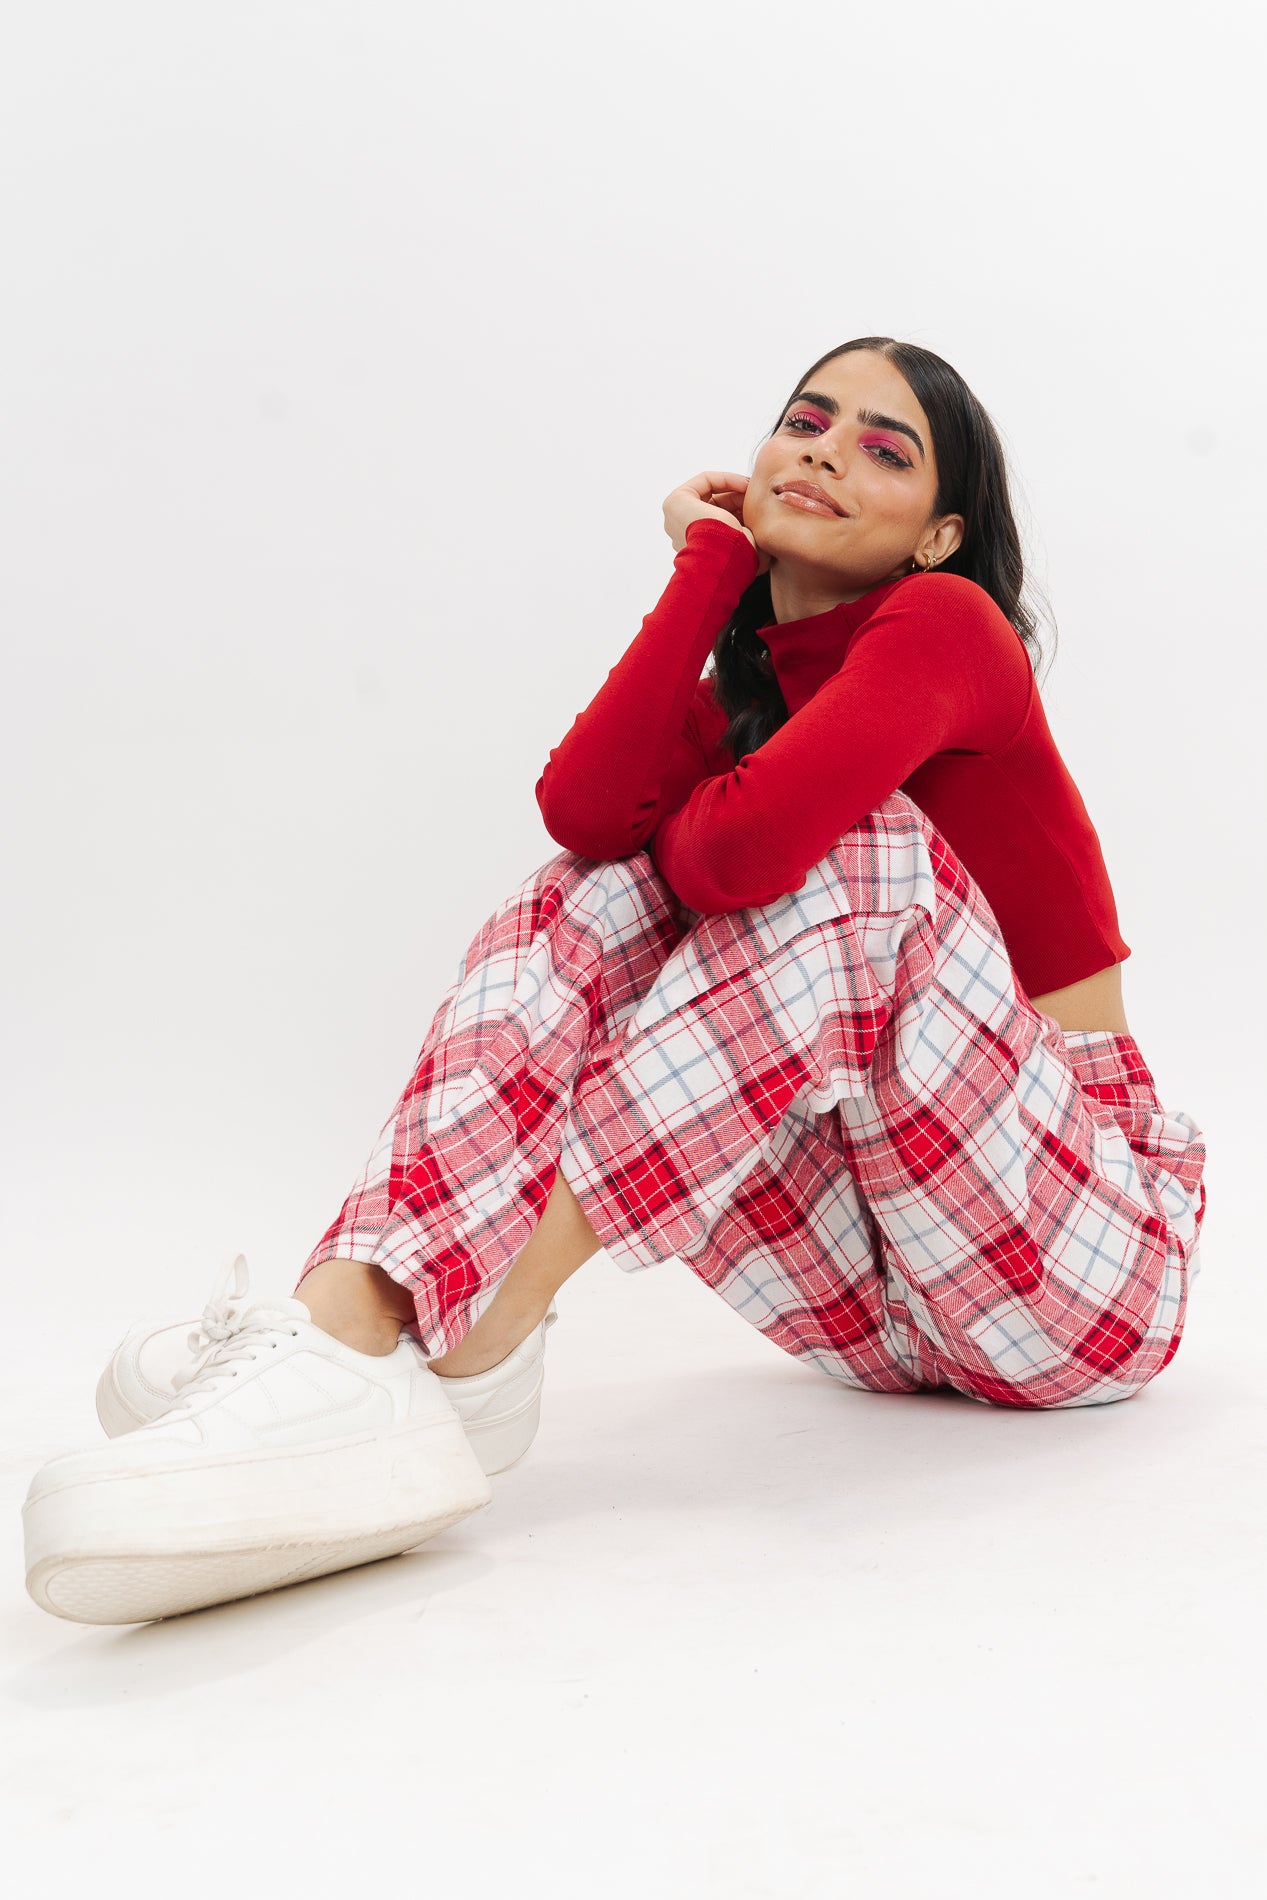 RED AND WHITE CHECKERED STRAIGHT FIT PANT